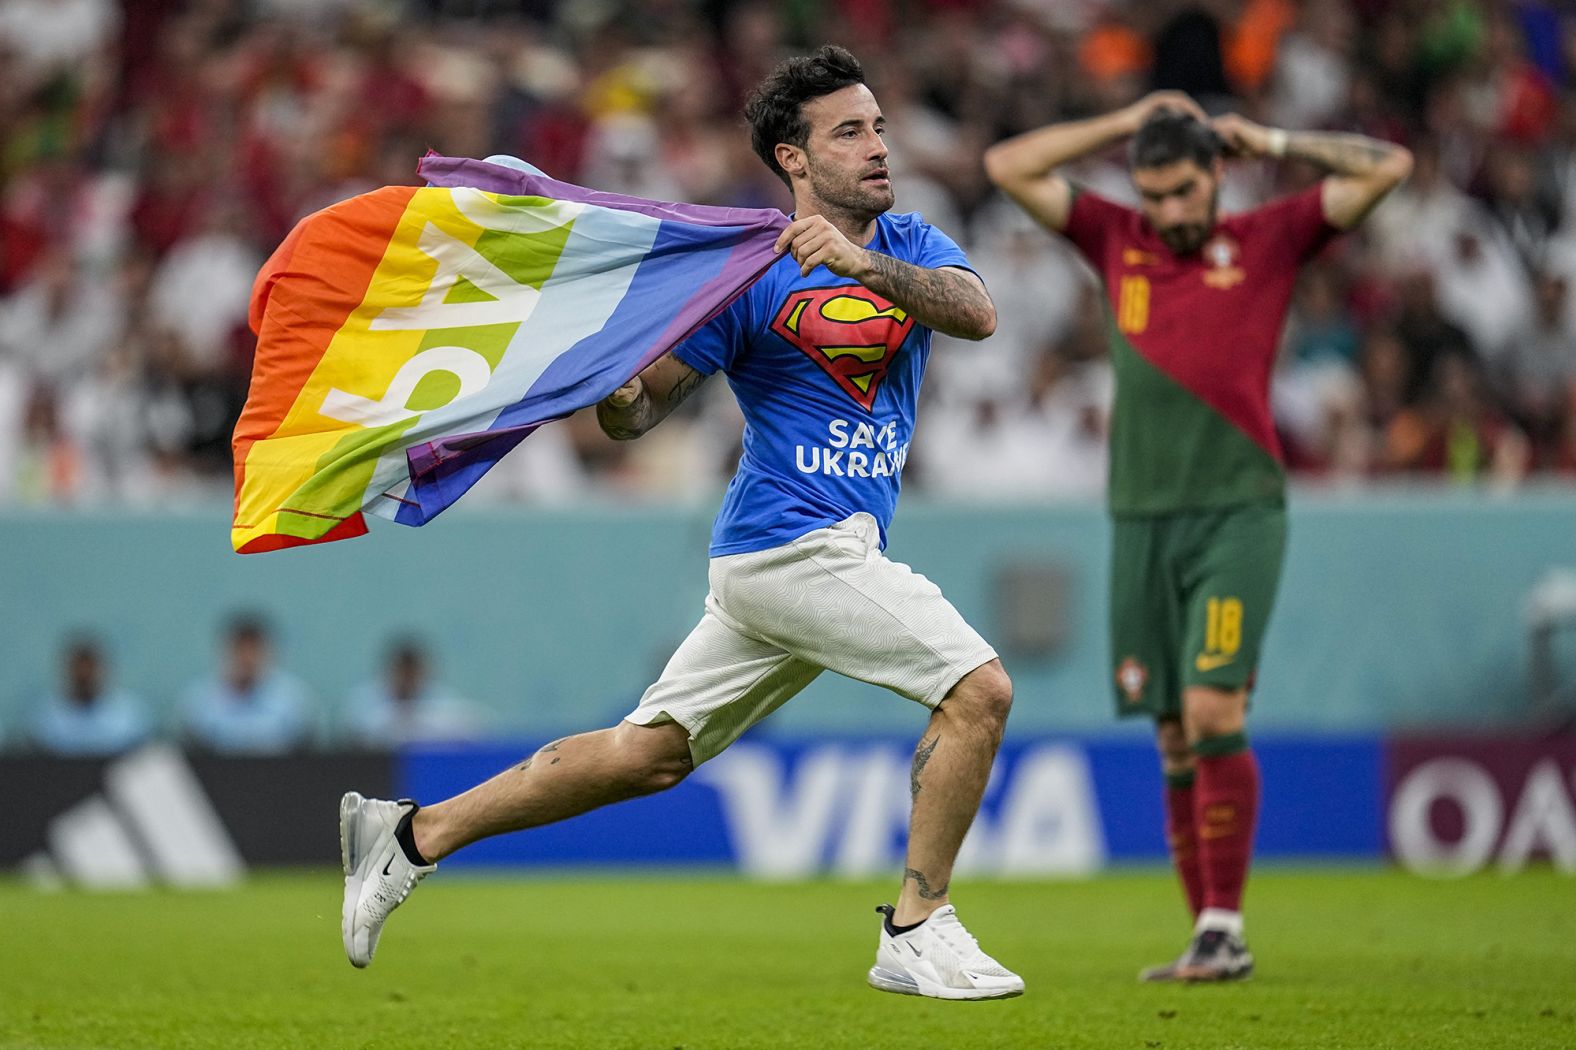 A man <a href="index.php?page=&url=https%3A%2F%2Fwww.cnn.com%2F2022%2F11%2F28%2Ffootball%2Fpitch-invader-rainbow-flag-2022-world-cup-spt-intl%2Findex.html" target="_blank">runs onto the field with a rainbow flag</a> during the match between Portugal and Uruguay. The man, an Italian named Mario Ferri, was also wearing a shirt that said "save Ukraine" on the front and "respect for Iranian women" on the back. In a series of posts of his Instagram story, Ferri called himself the "new Robin Hood" and said, "Breaking the rules if you do it for a good cause is NEVER A CRIME." He was banned from attending future matches.